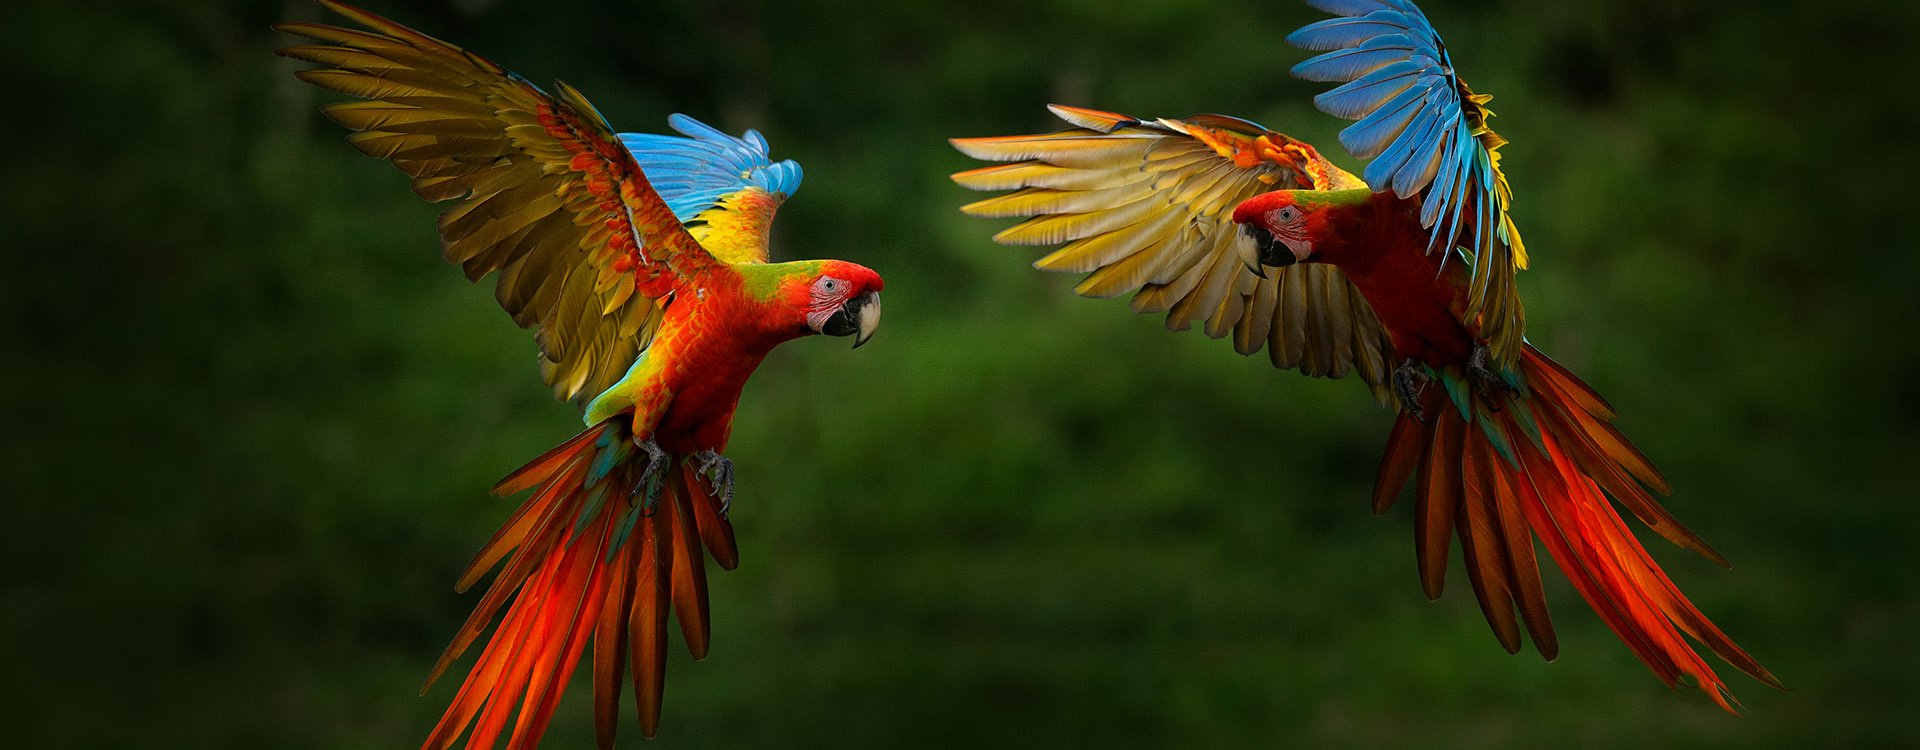 Hybrid Macaw parrots in tropical forest